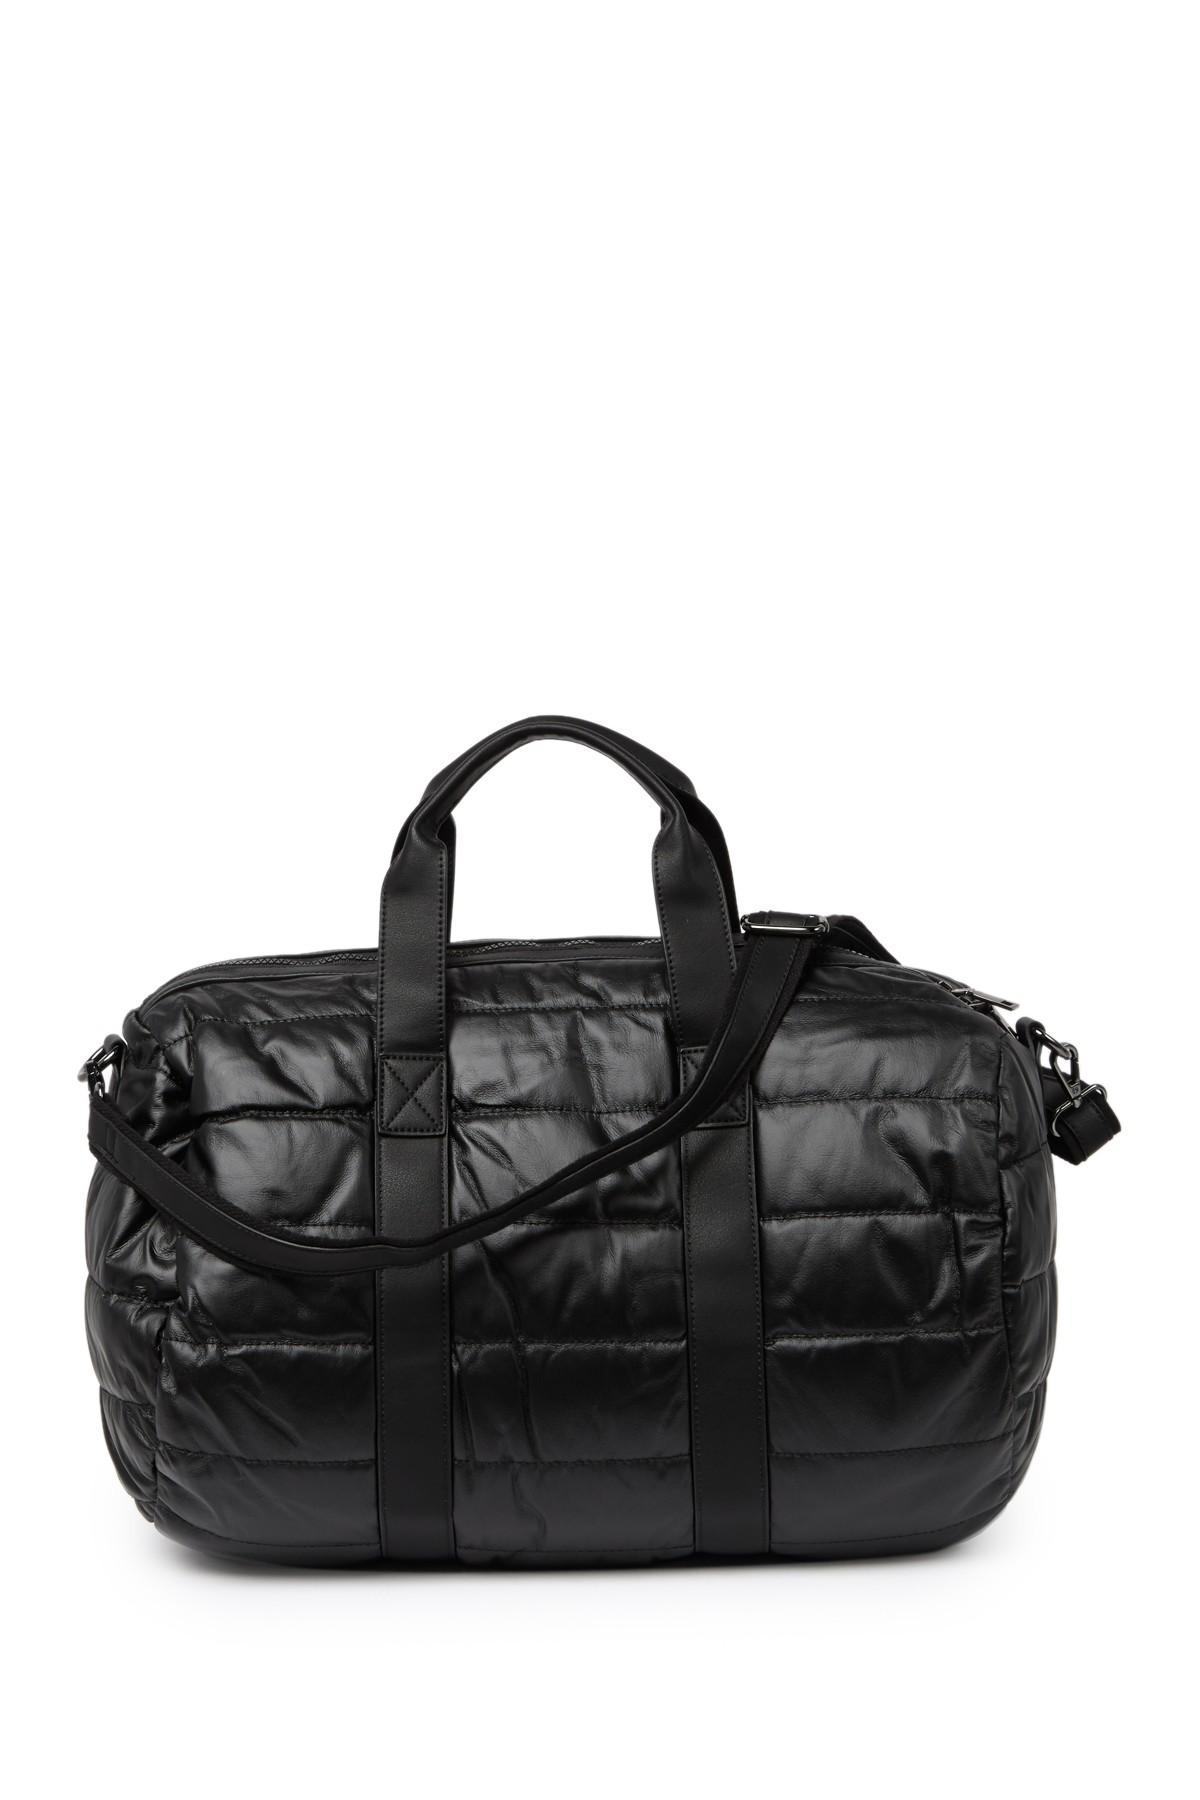 Urban Expressions Metallic Quilted Puffer Duffle Bag in Black | Lyst